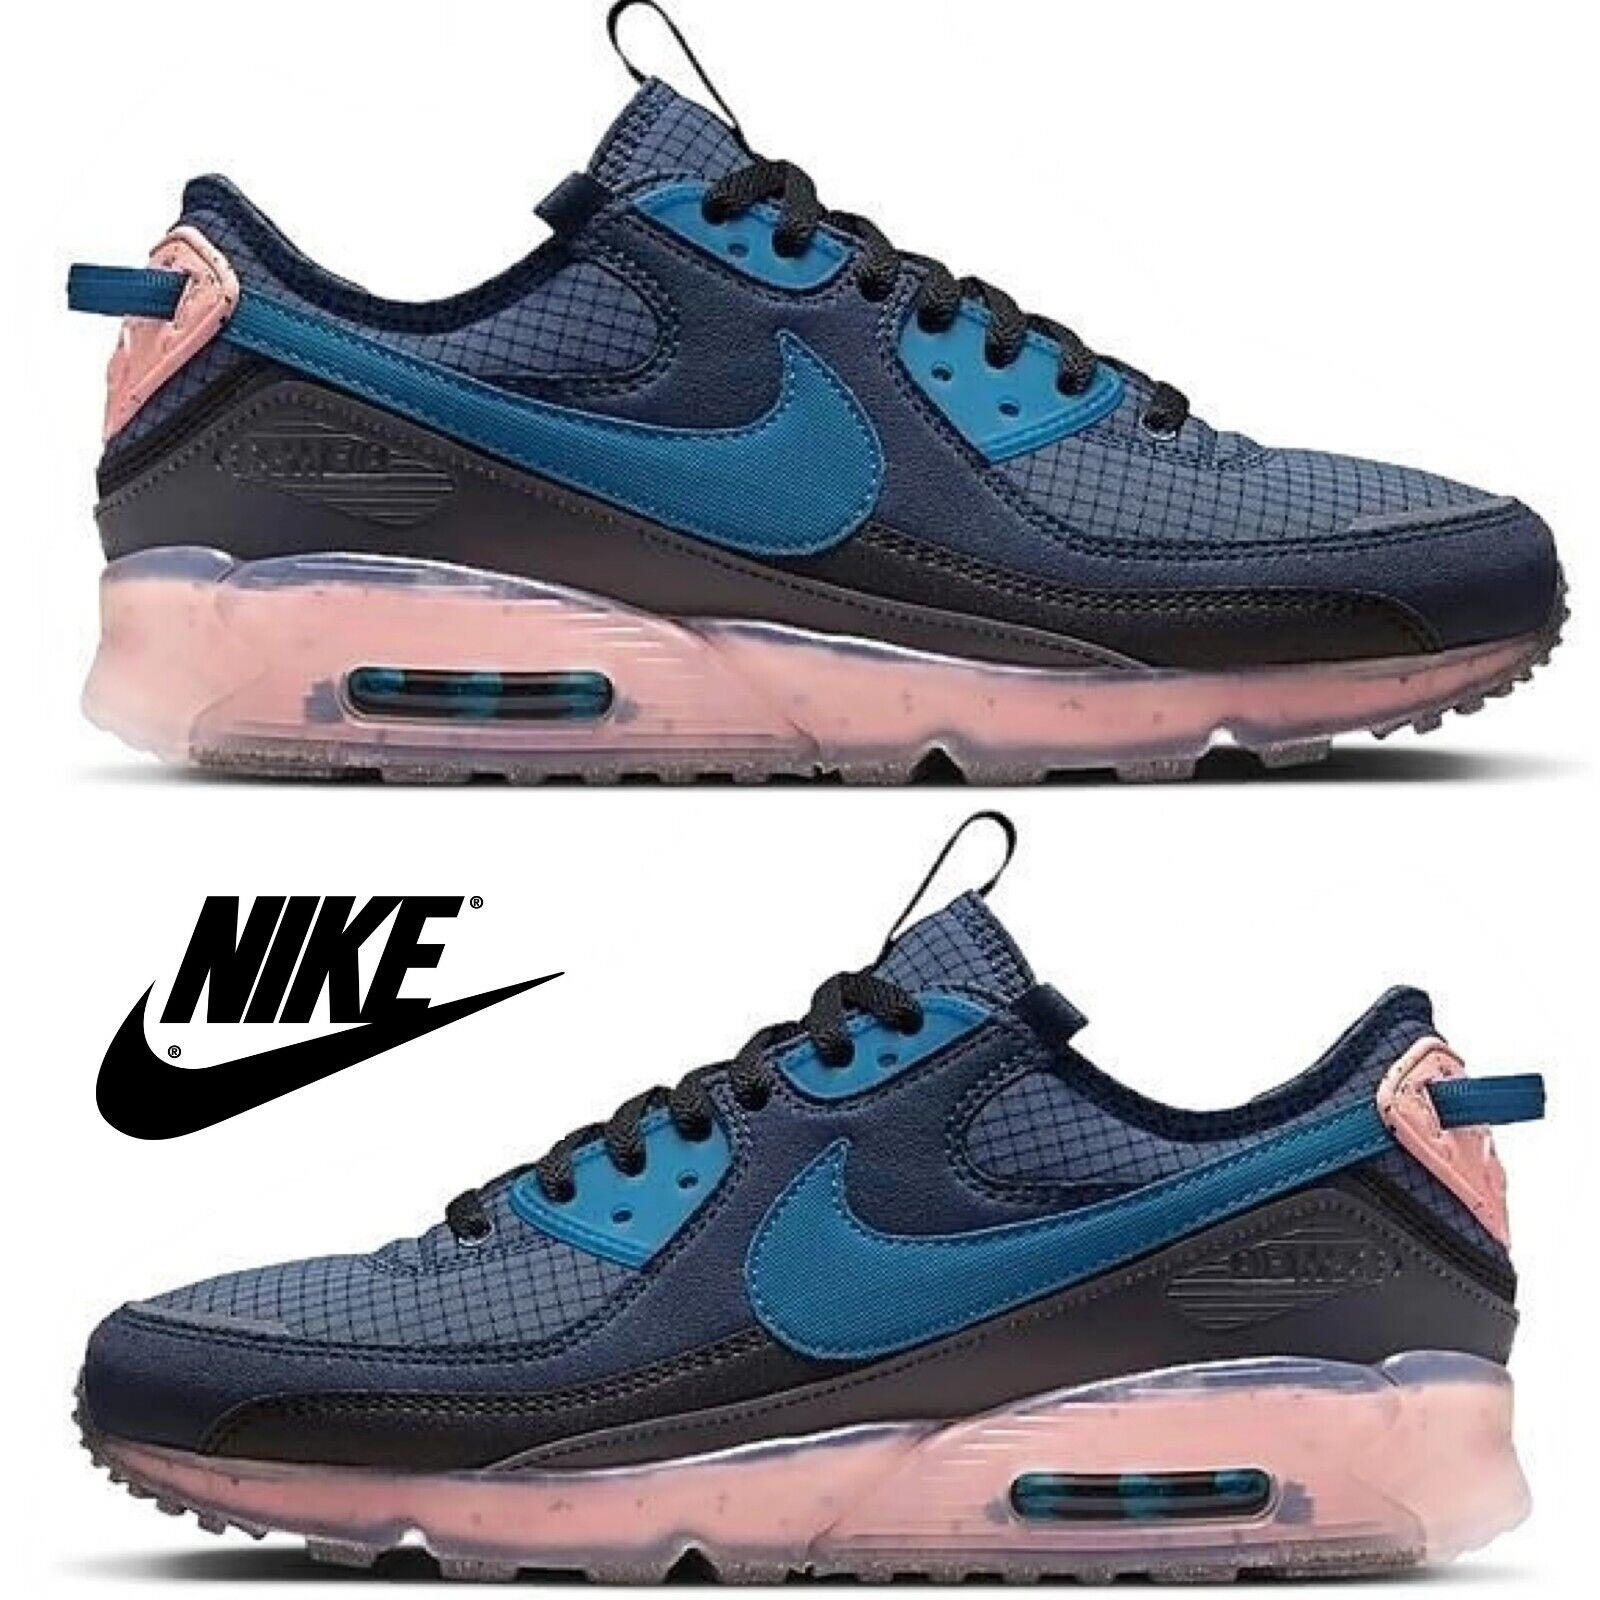 Nike shoes Air Max - Blue , Obsidian/Thunder Blue/Light Madder Root/Marina Maufacturer 4